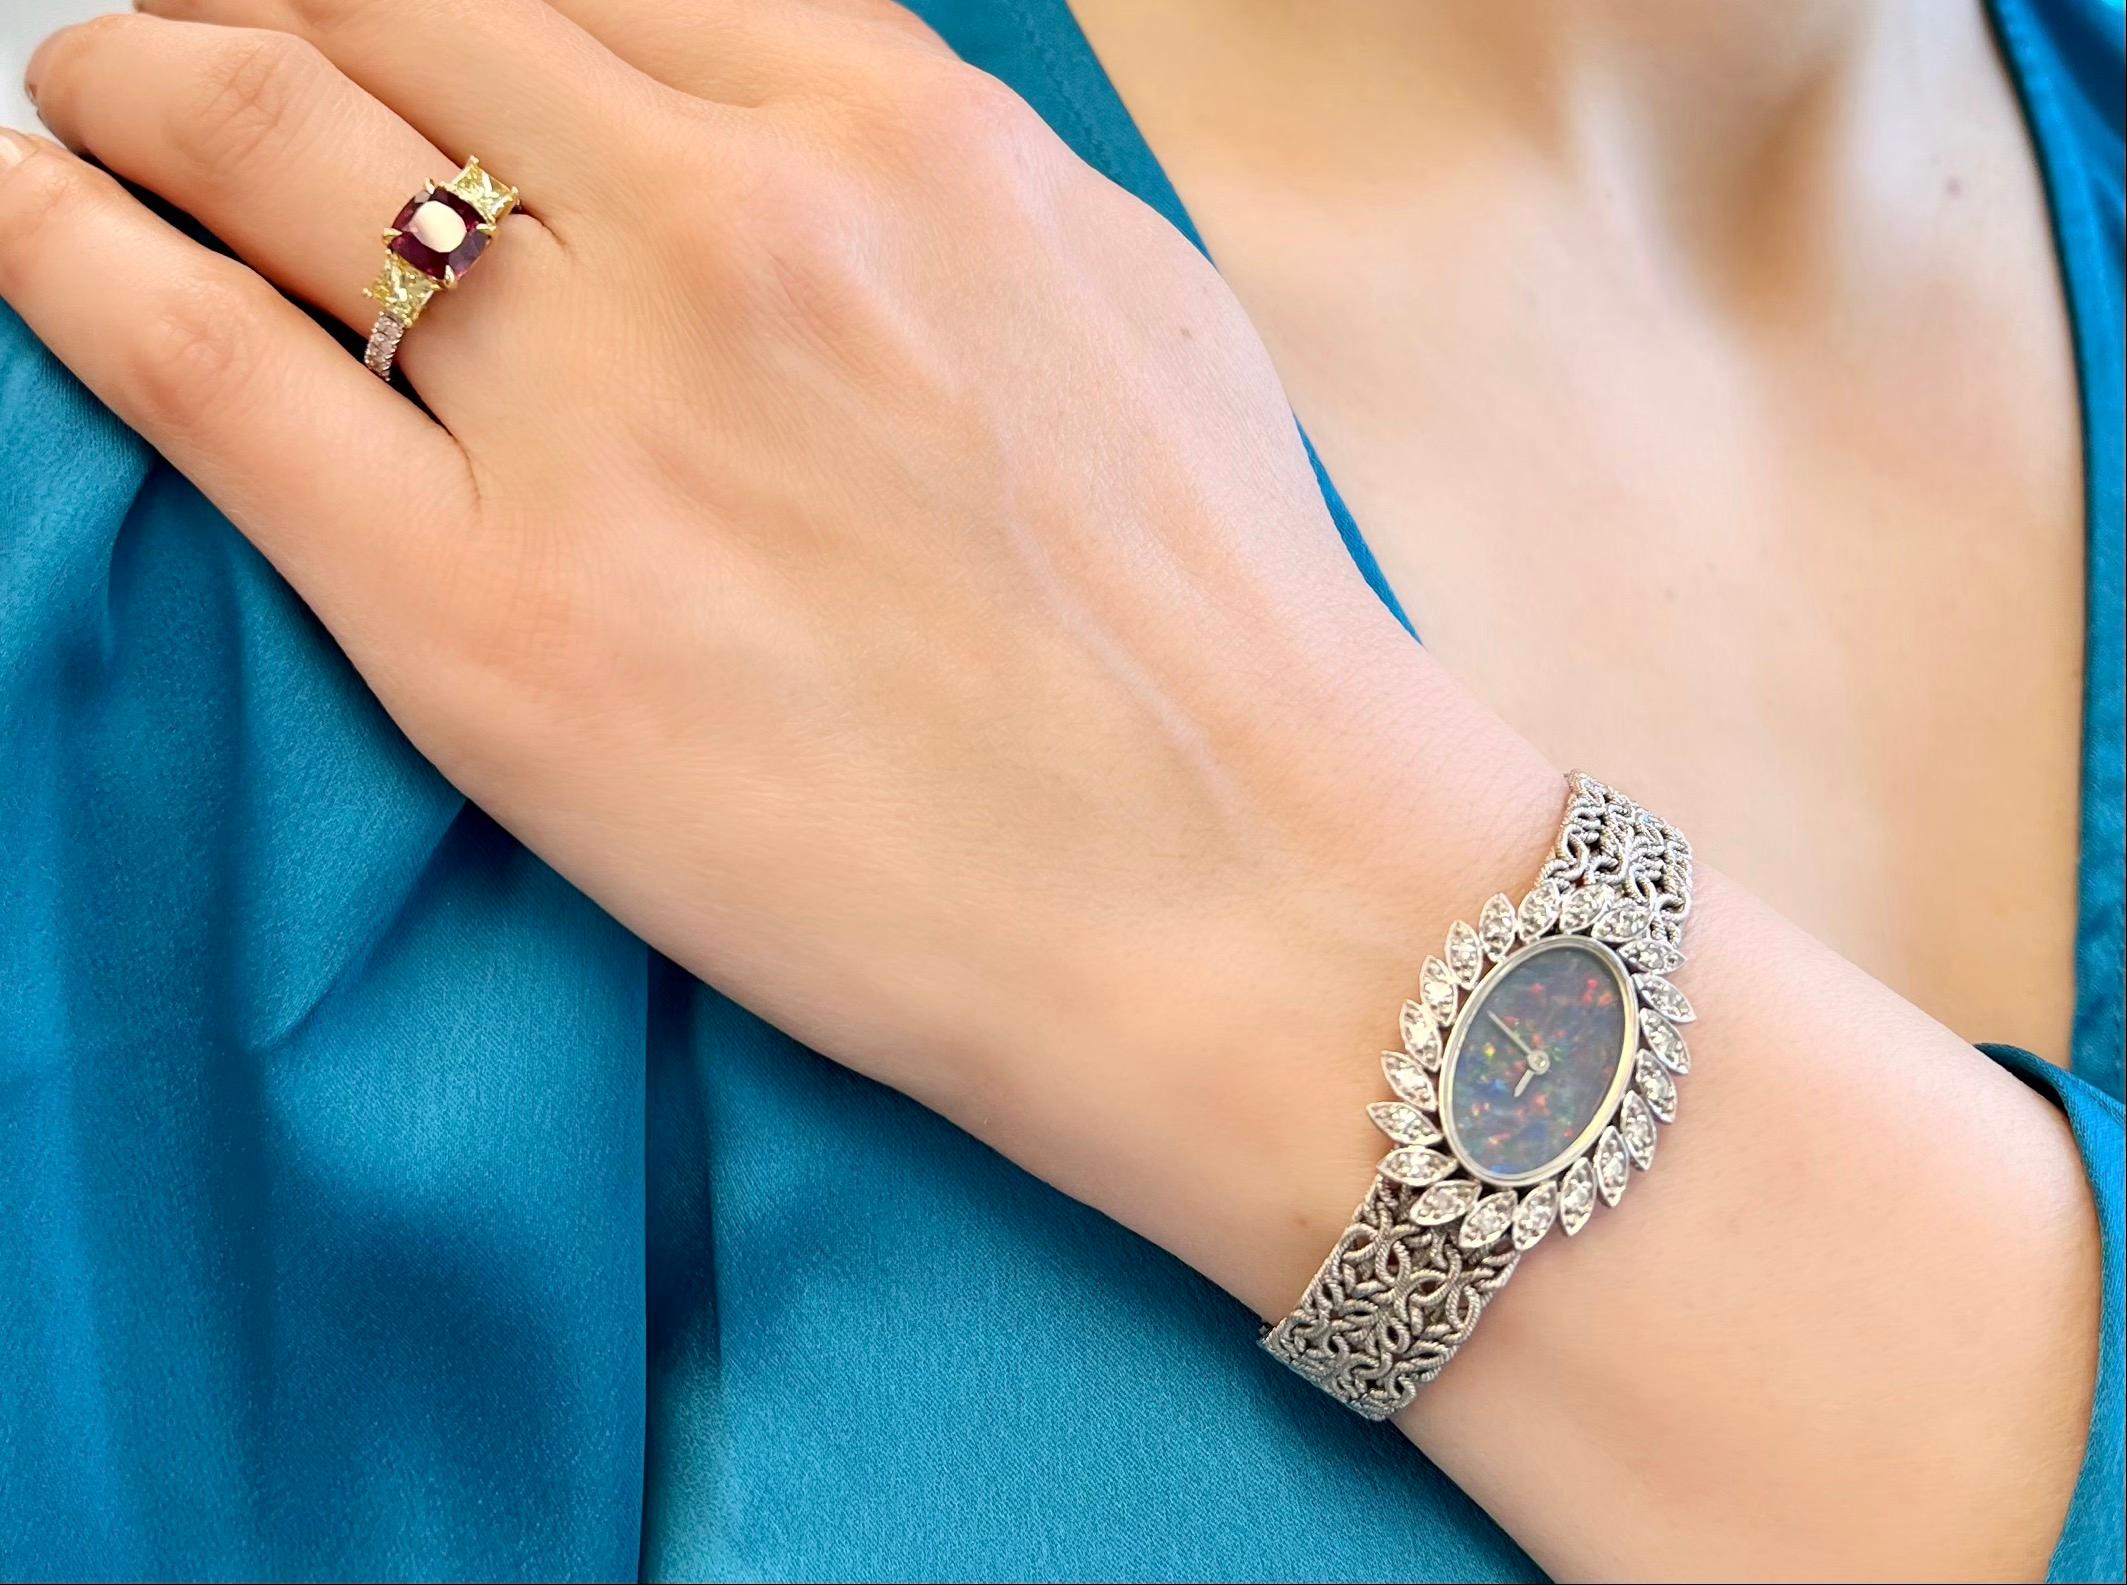 This unique vintage Chopard ladies wristwatch features an elegant opal dial on a textured gold bracelet, crafted entirely in 18k white gold.

The timeless timepiece is adorned with a diamond surround, enhancing its stunning and sophisticated appeal.